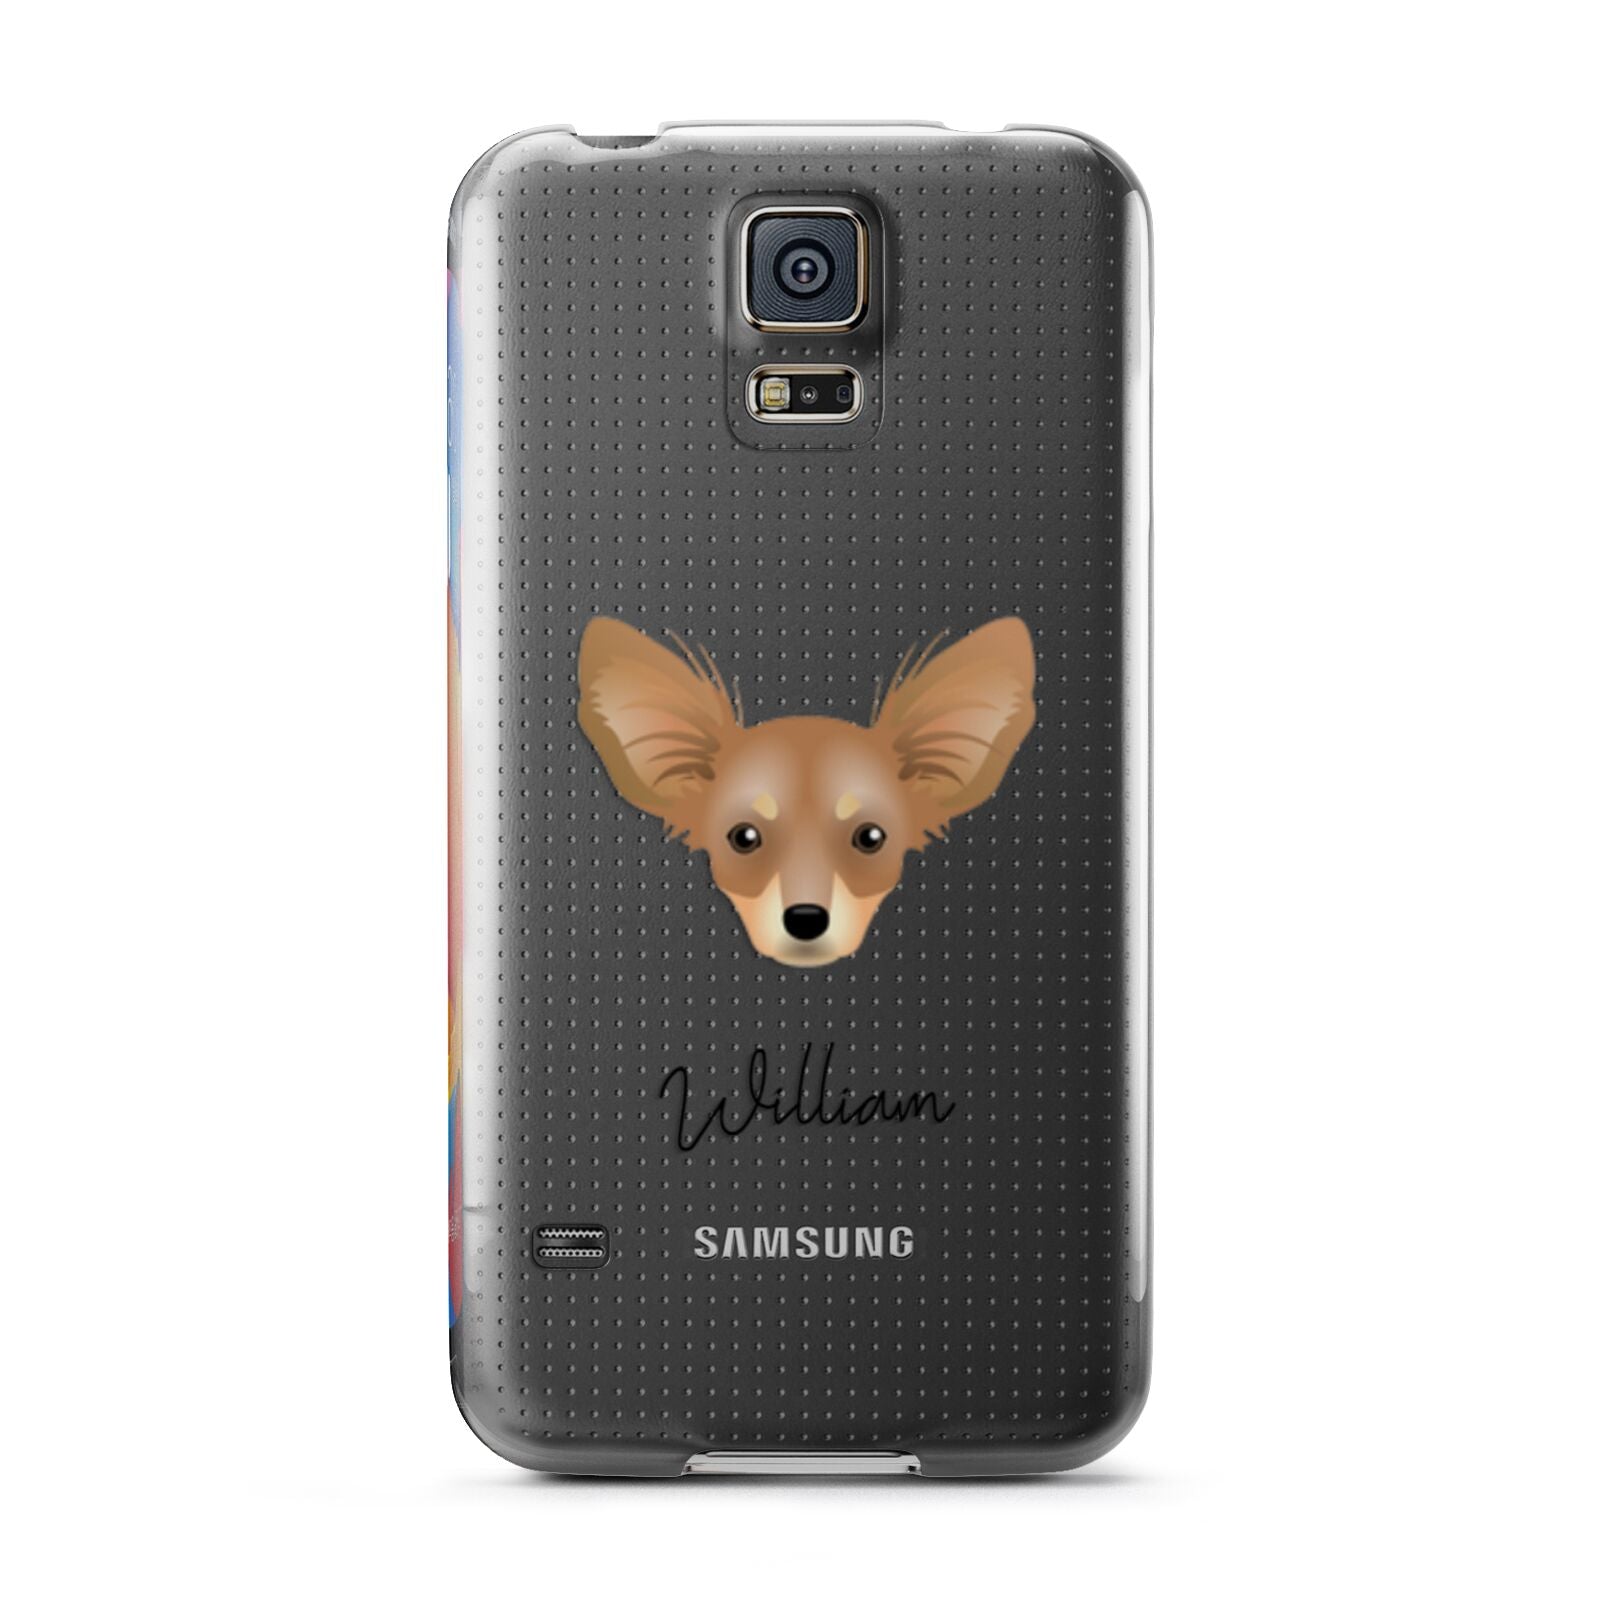 Russian Toy Personalised Samsung Galaxy S5 Case